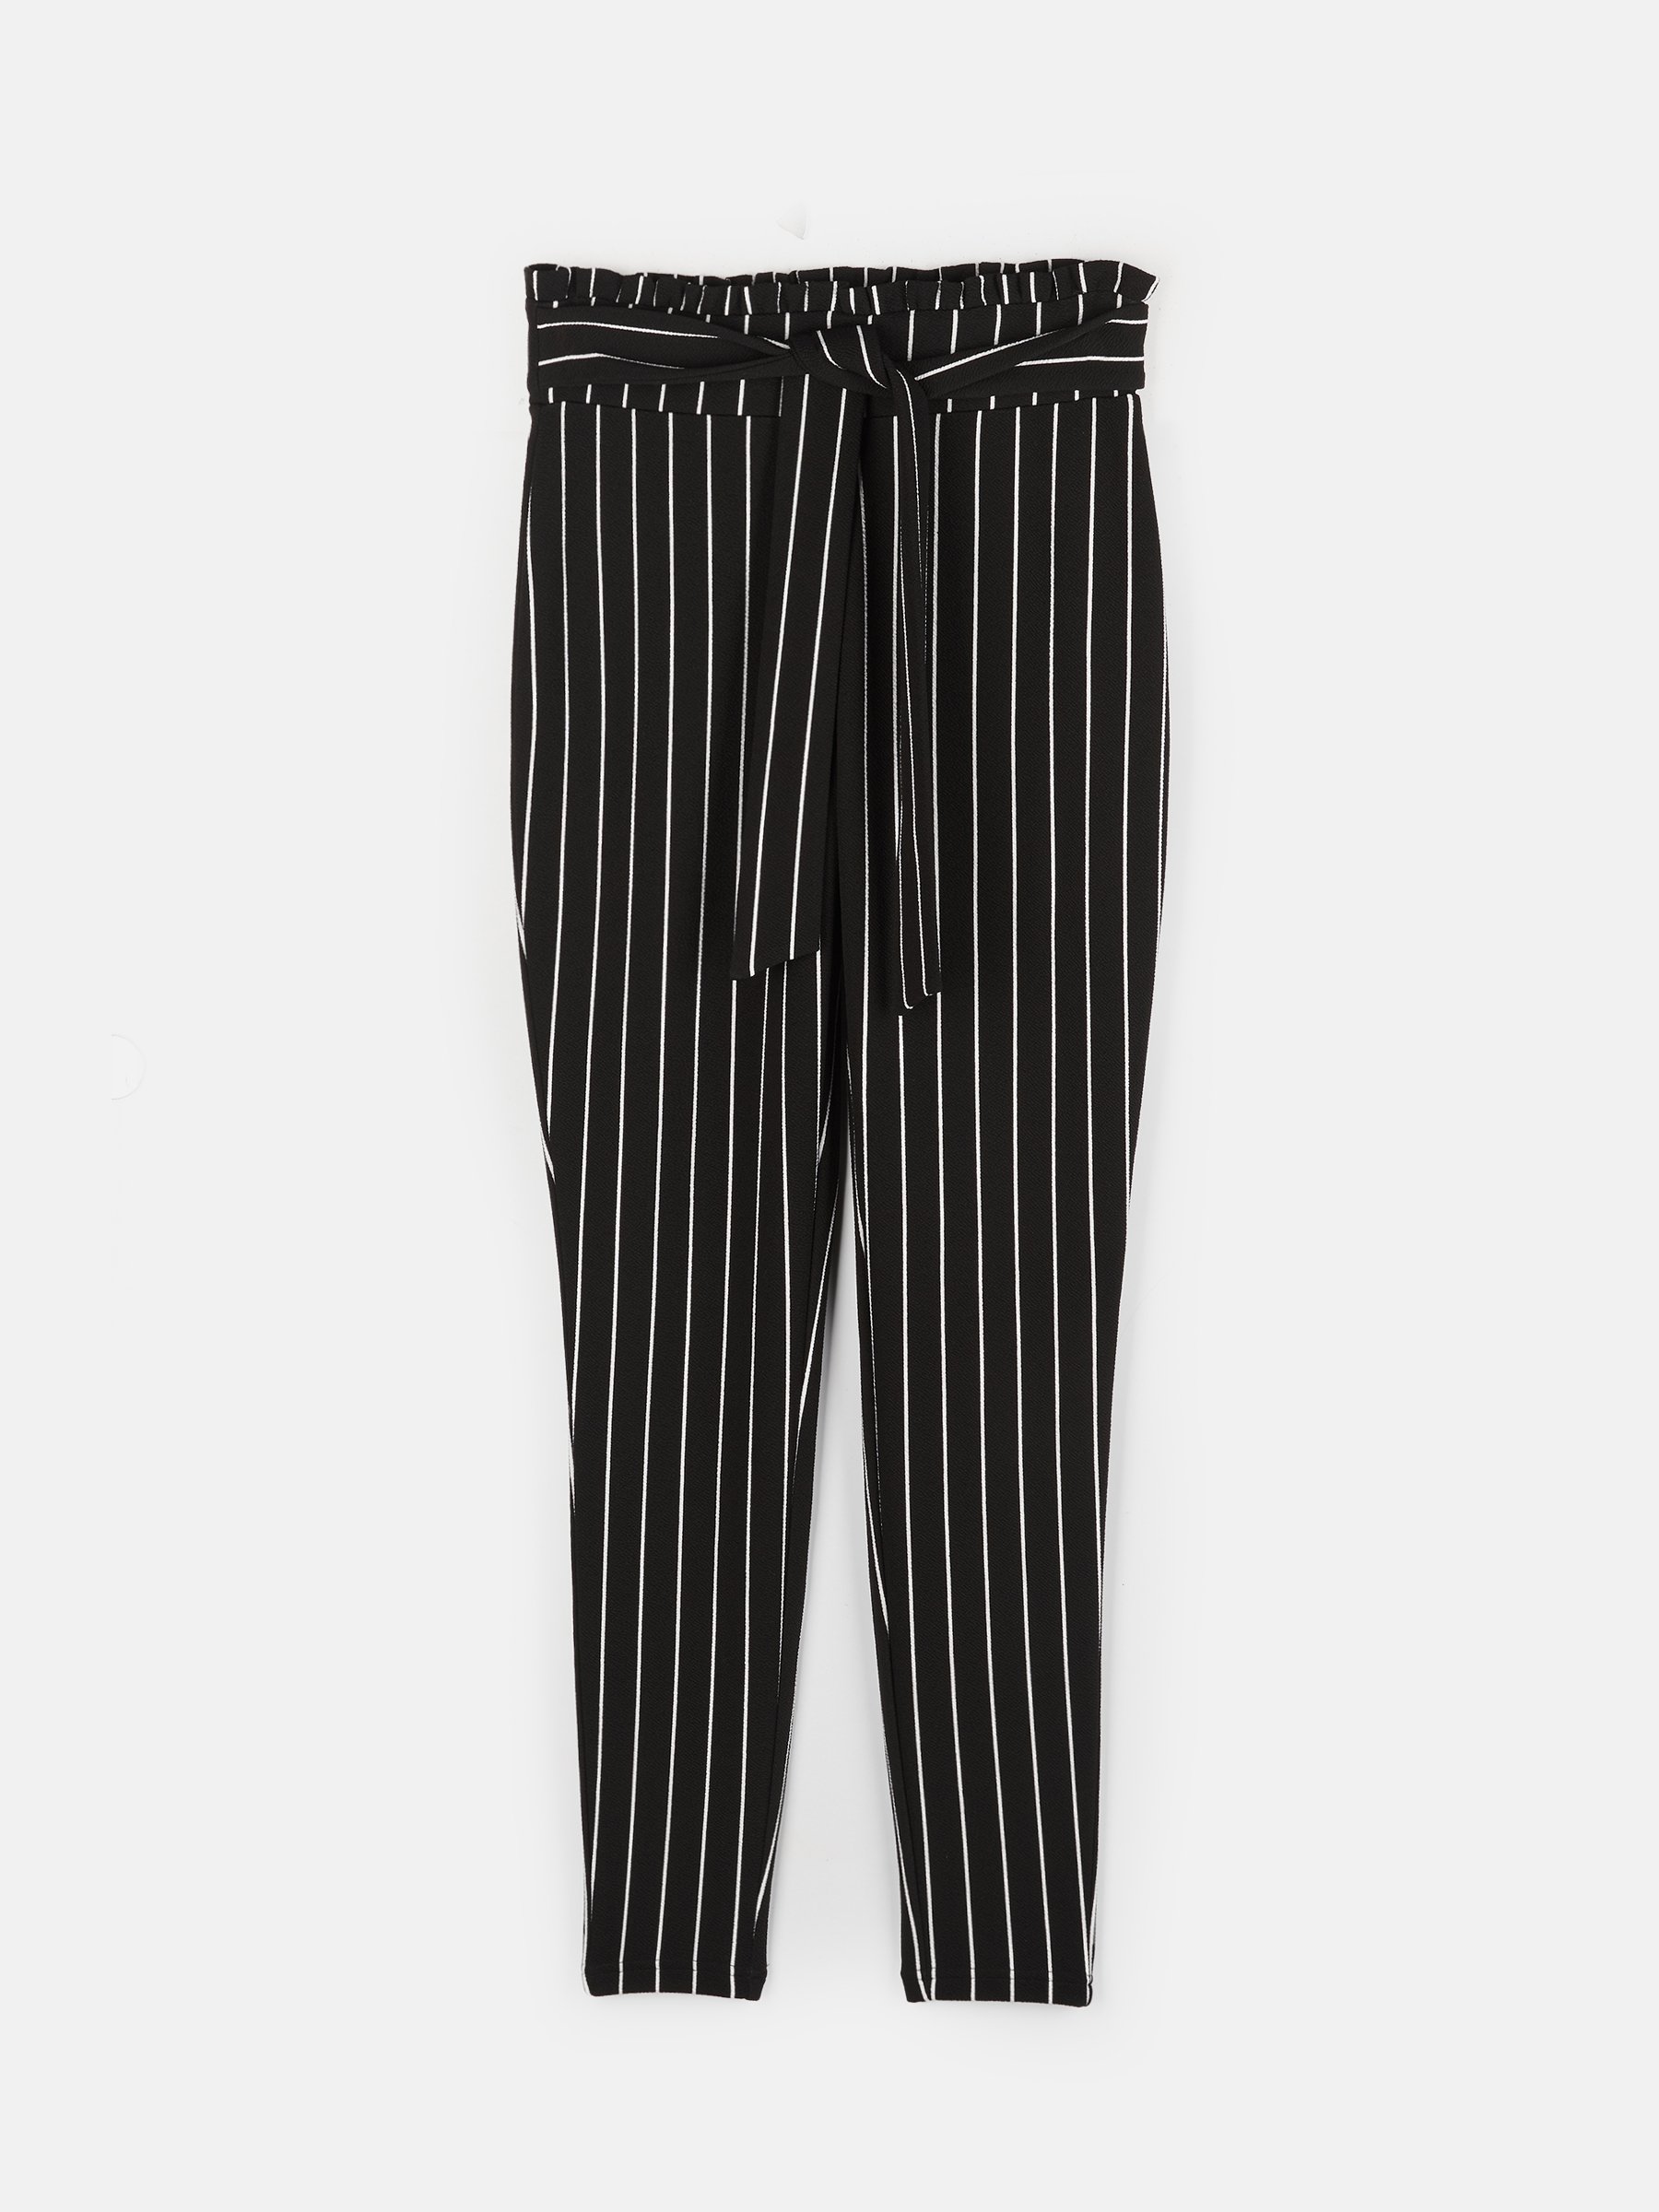 Buy Ding Dong Baby Boys Girls Striped Pants at Ubuy India